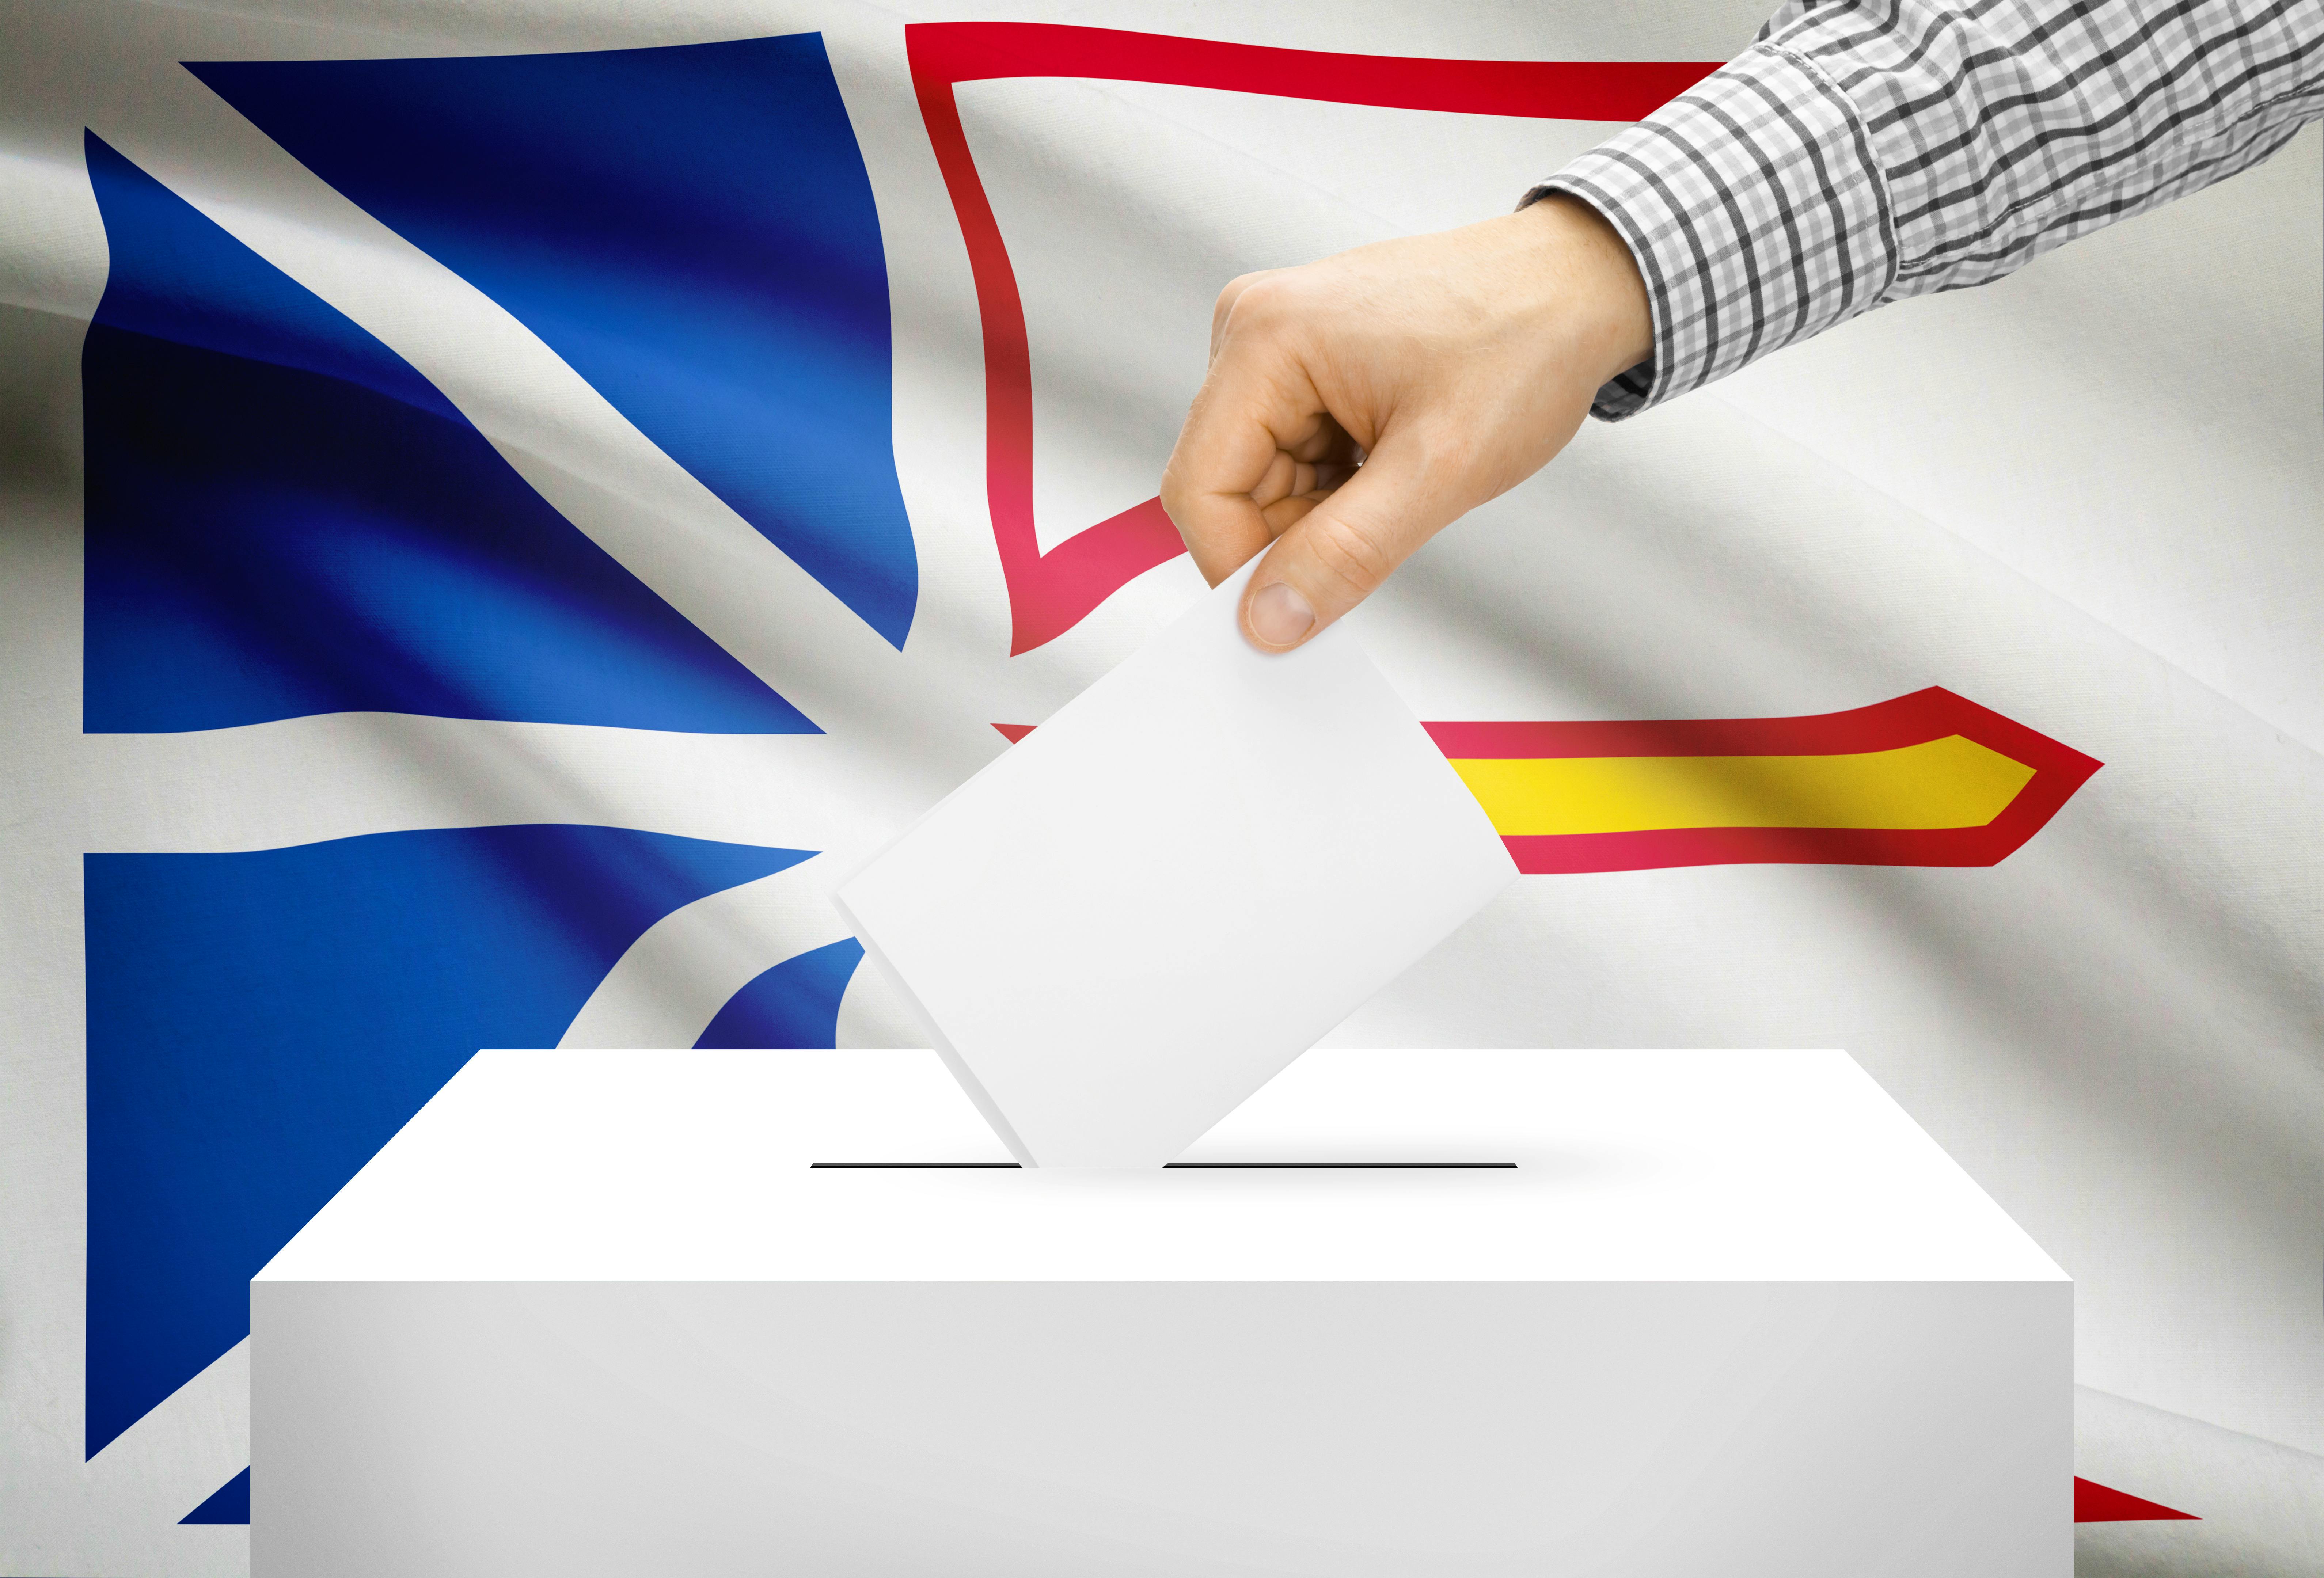 Newfoundland and Labrador polls were open from 8:30 a.m. to 8:30 p.m. N.L. time Oct. 21.